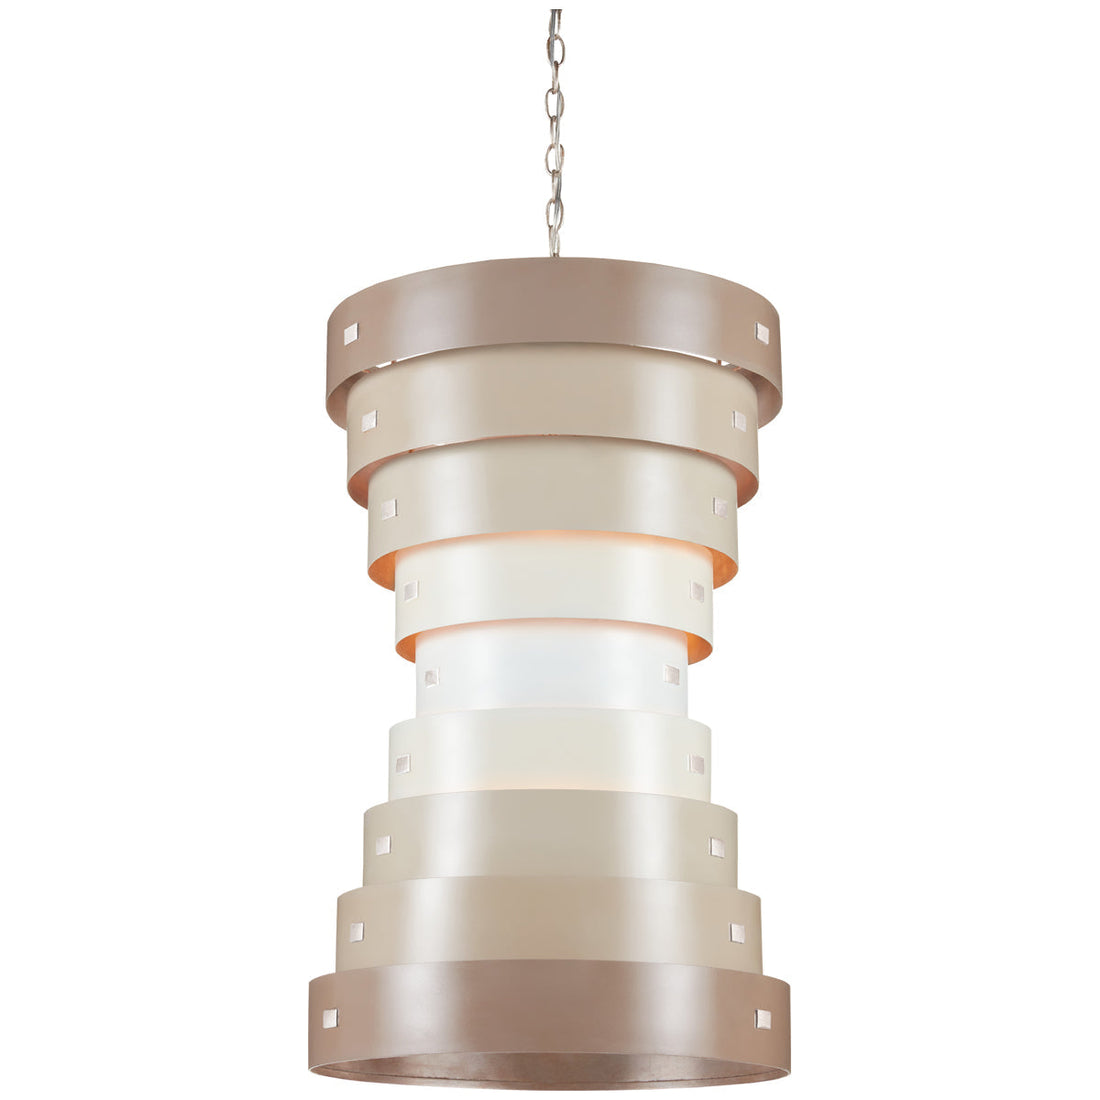 Currey and Company Graduation Small Chandelier